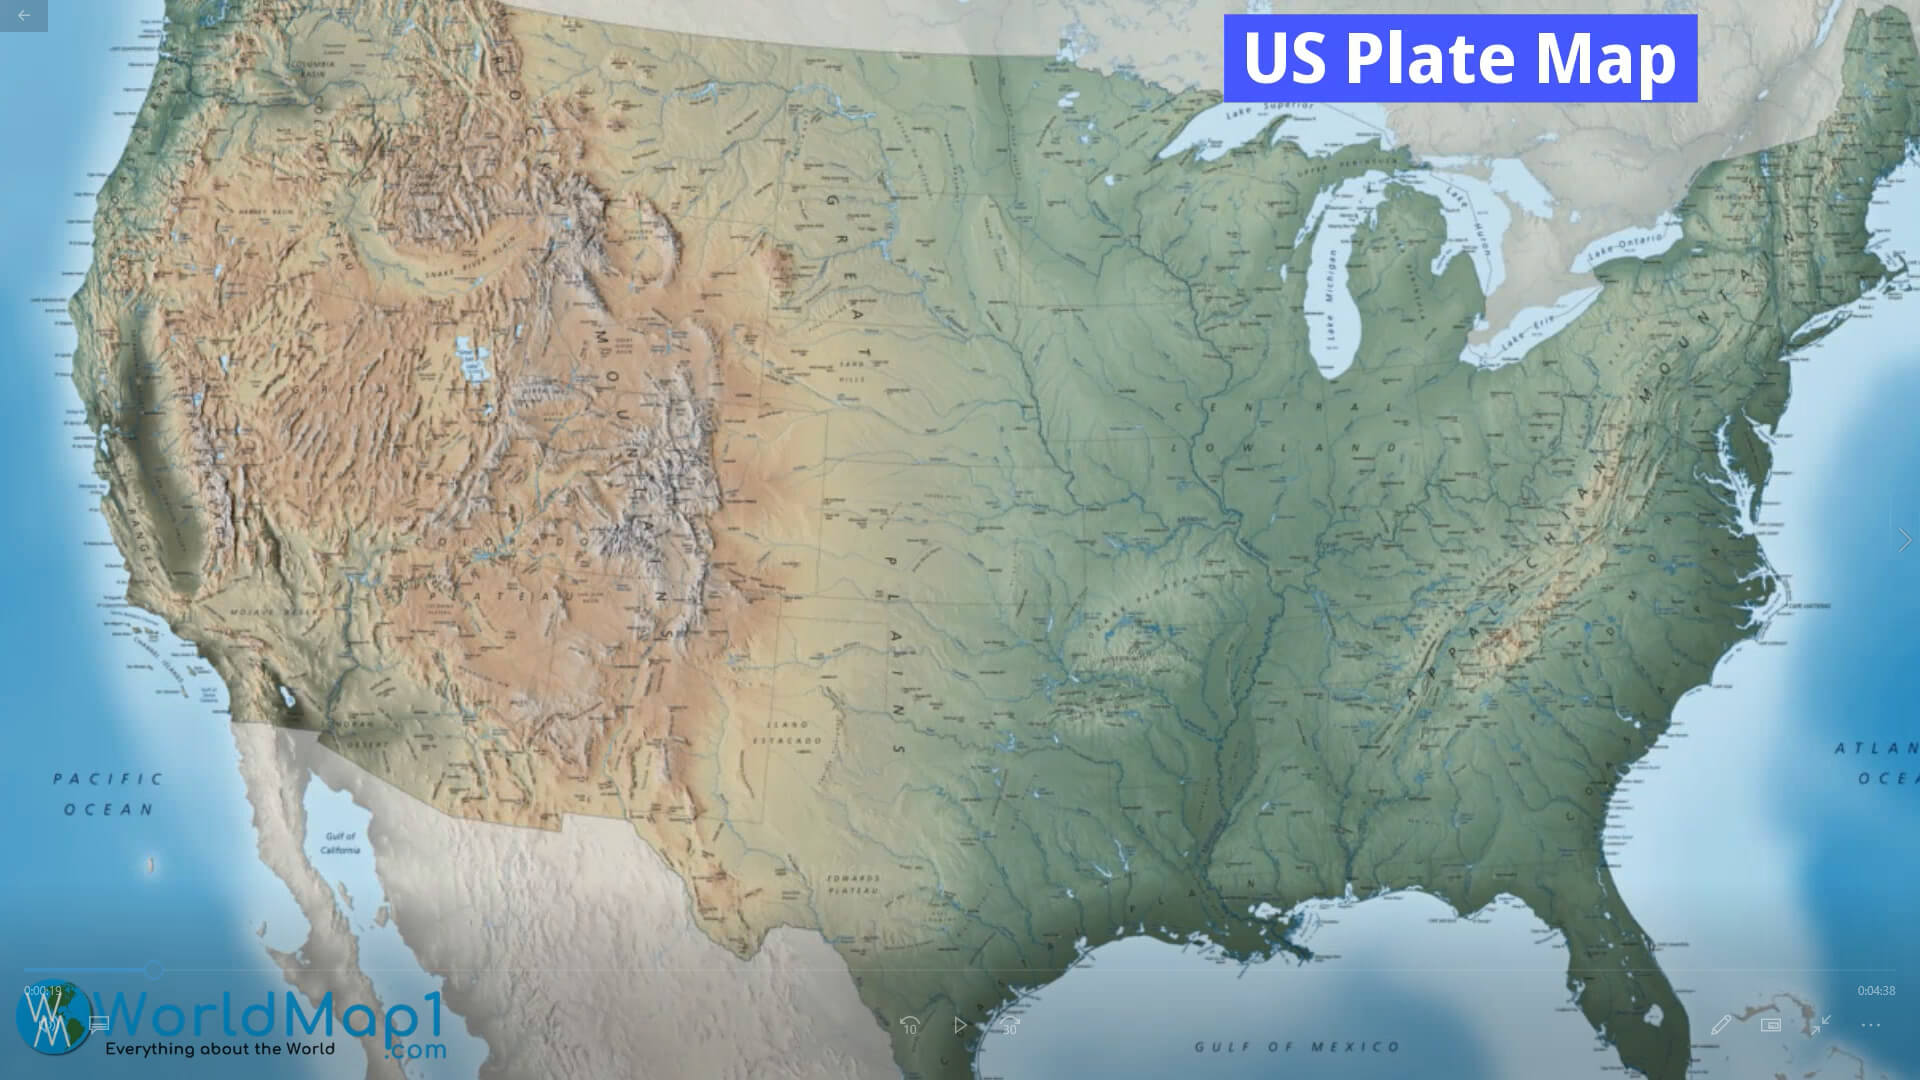 US Plate Map